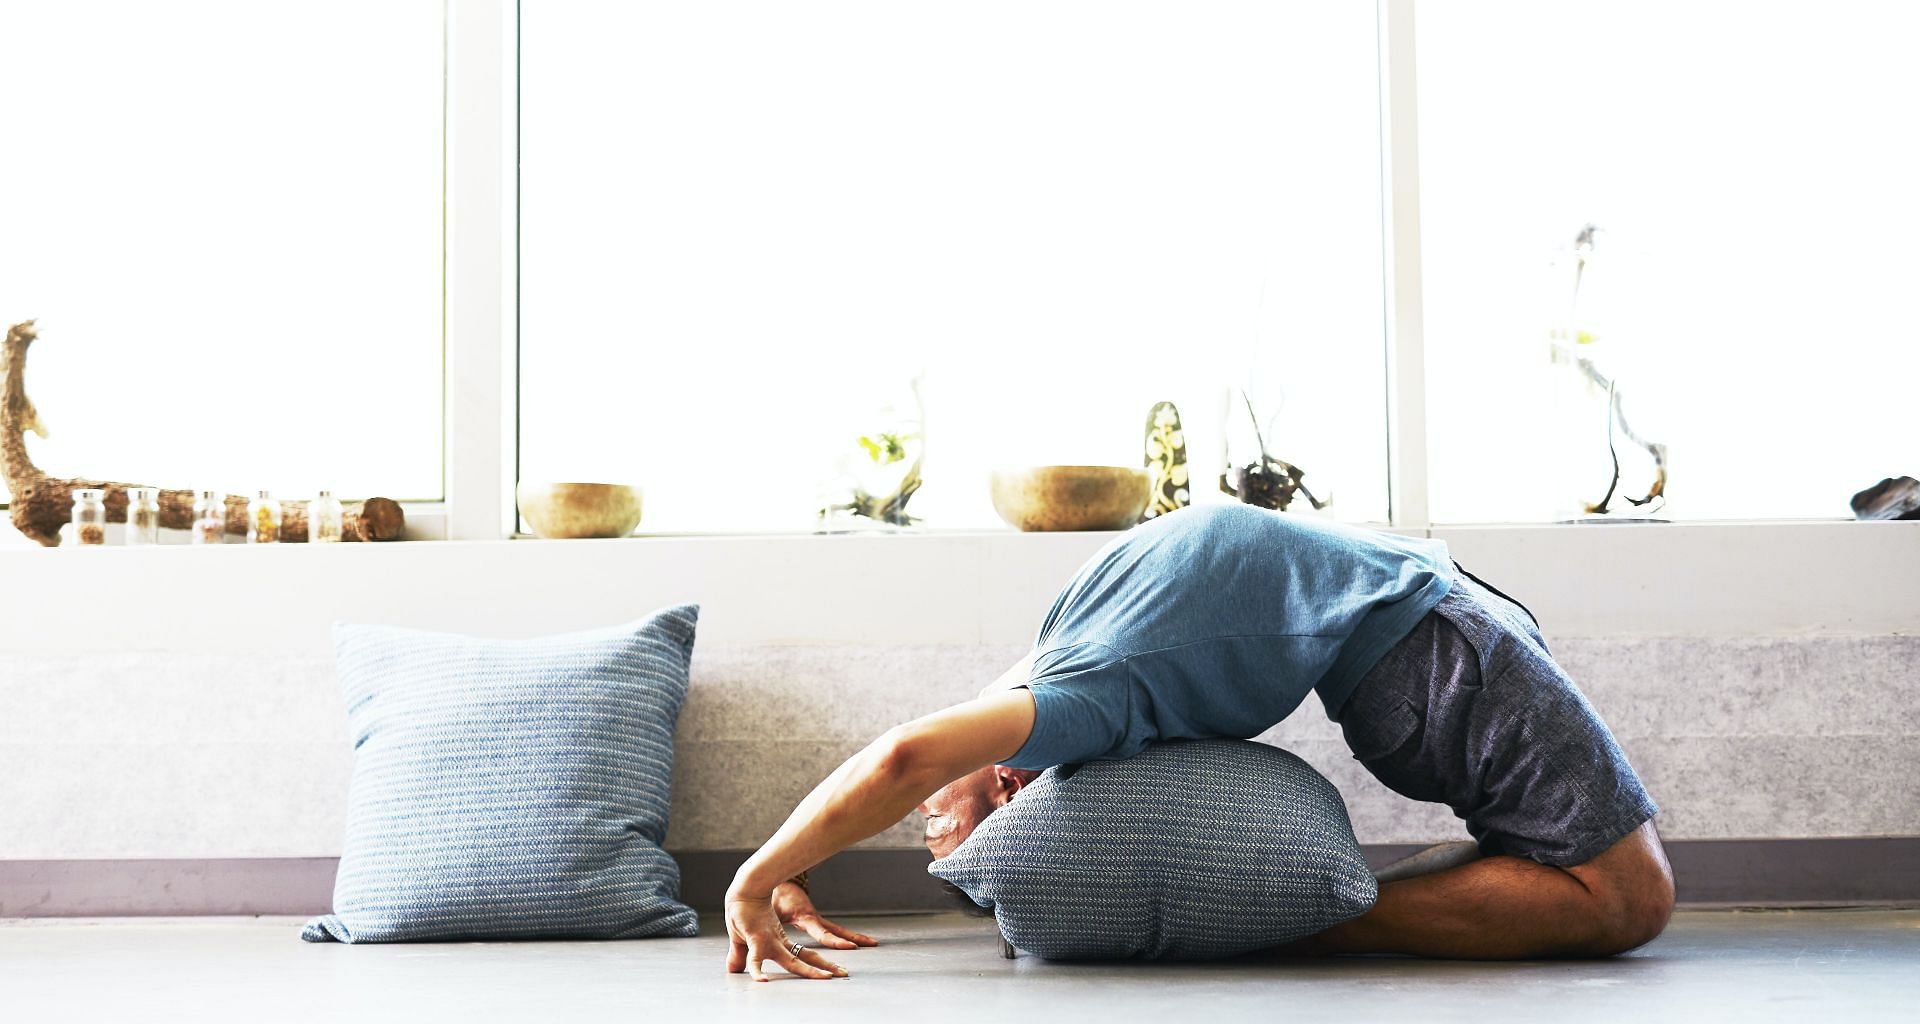 Starting an at-home yoga practice can ultimately help you save time, effort, and money. (Image via Unsplash/ Wee Lee)